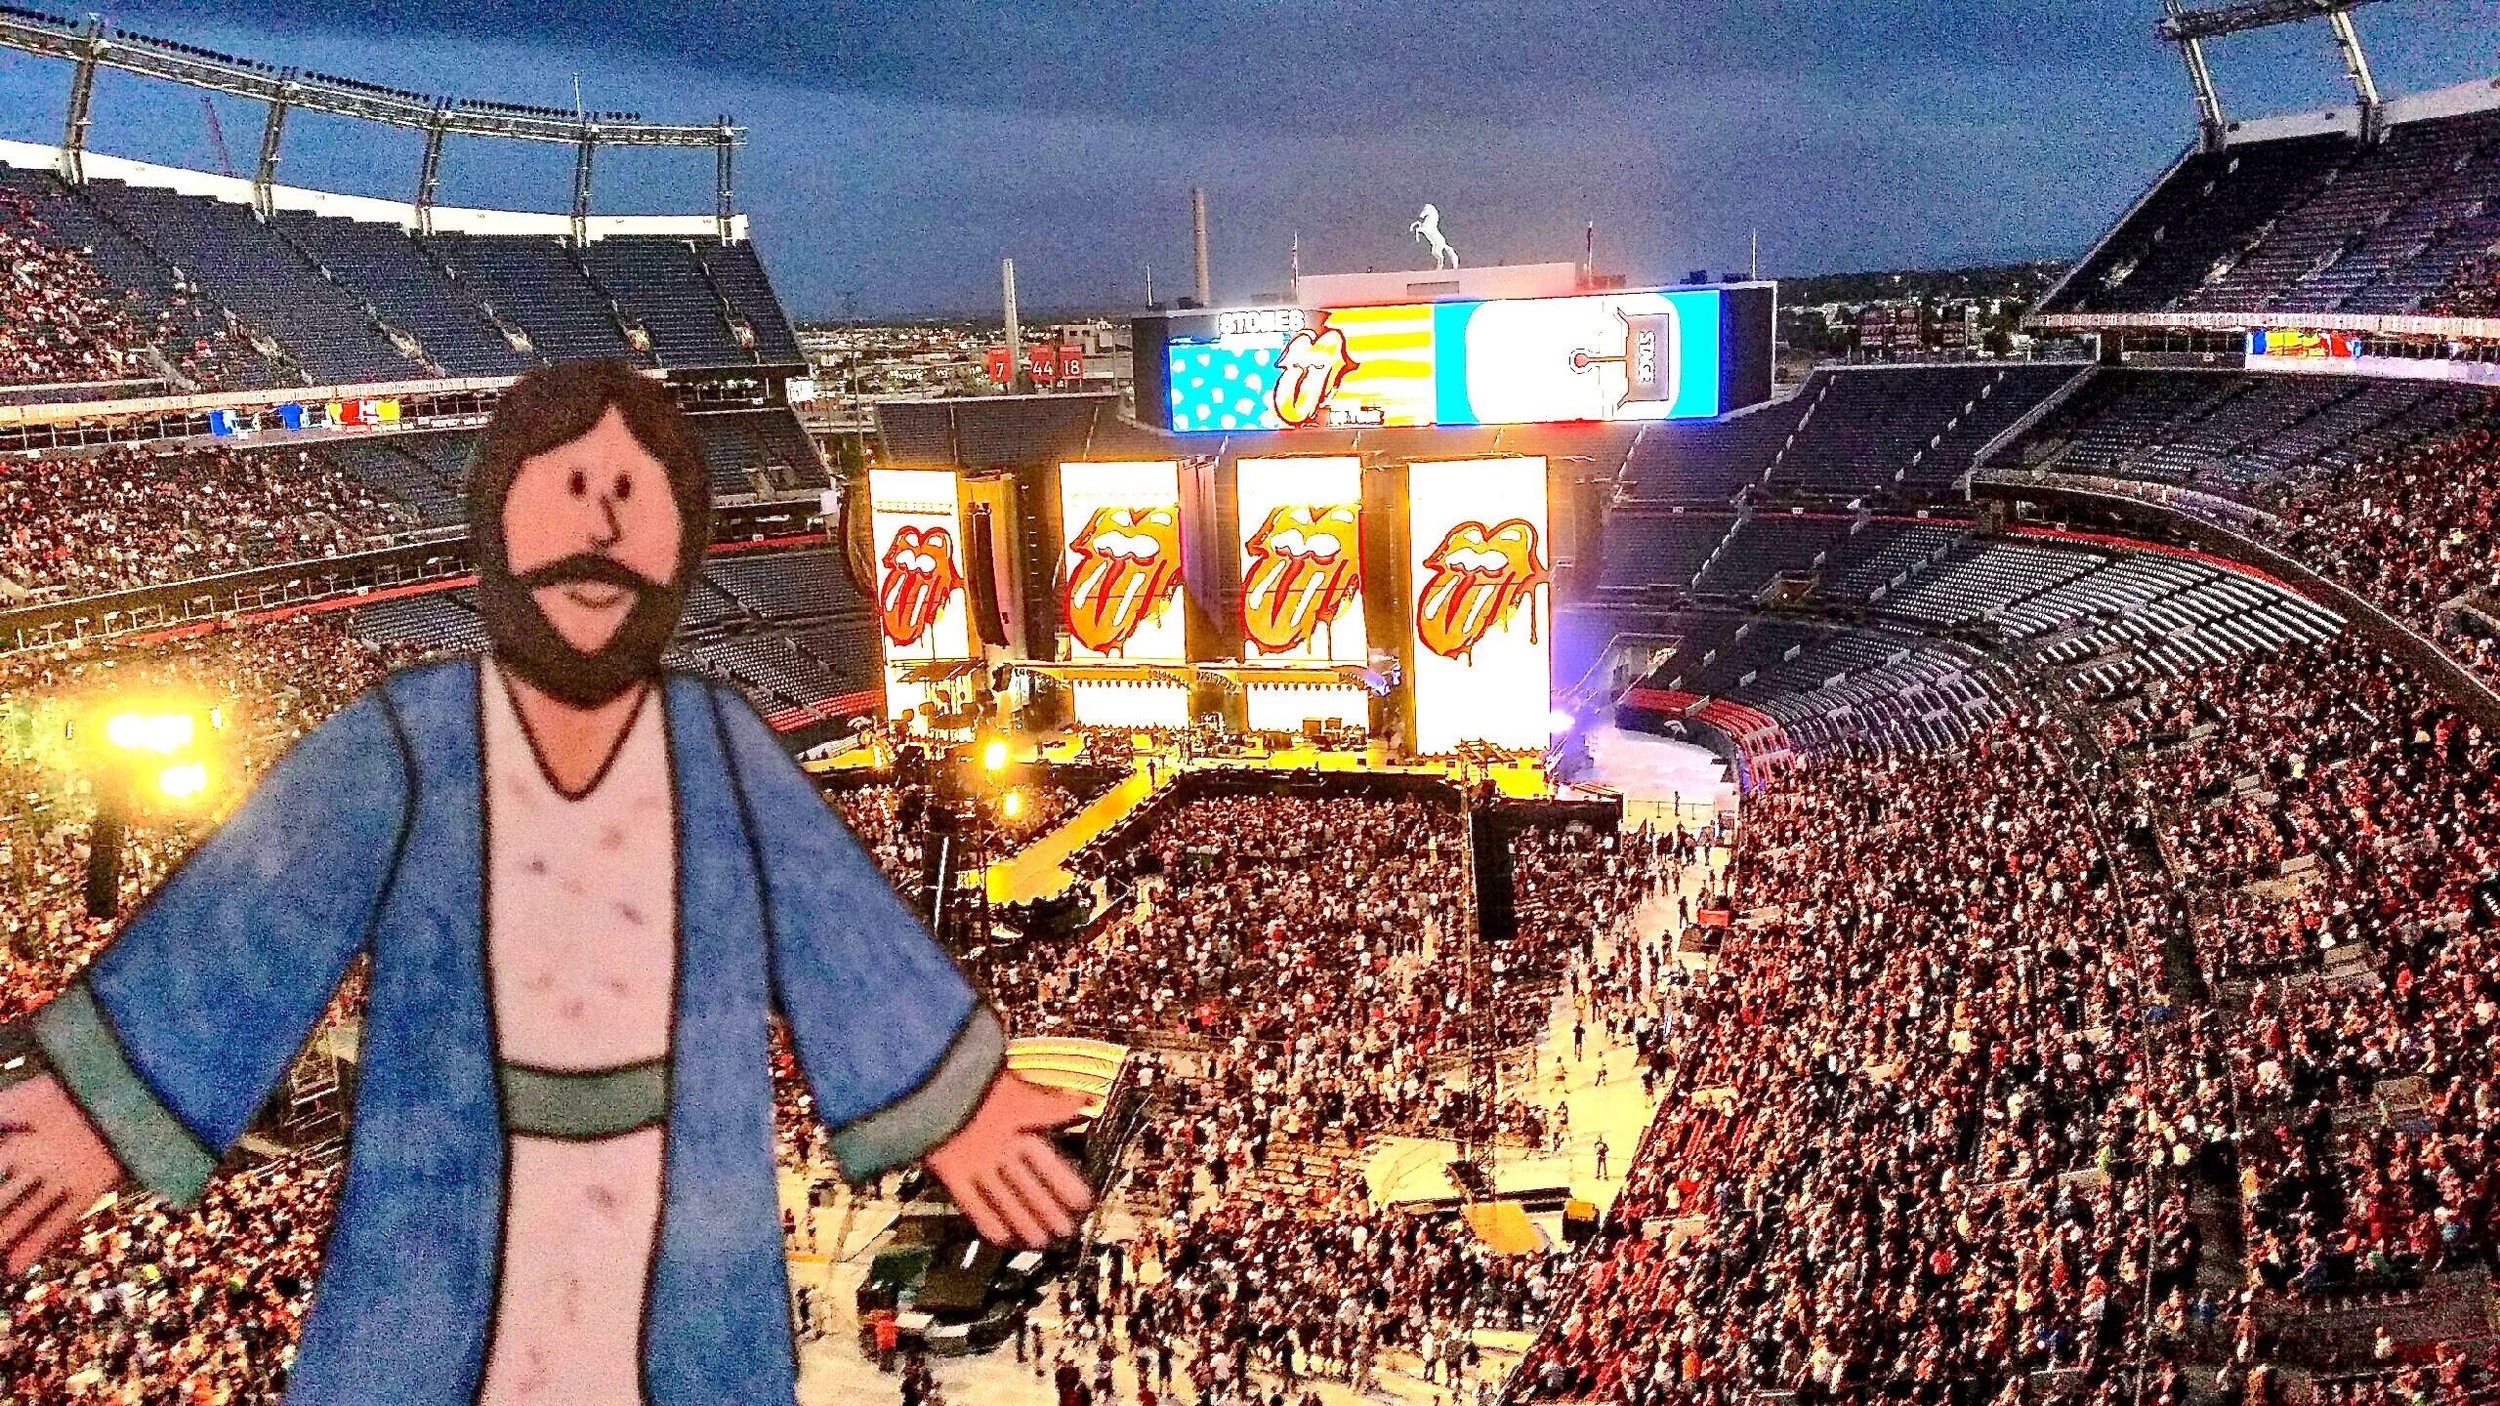 Flat James at the Rolling Stones concert